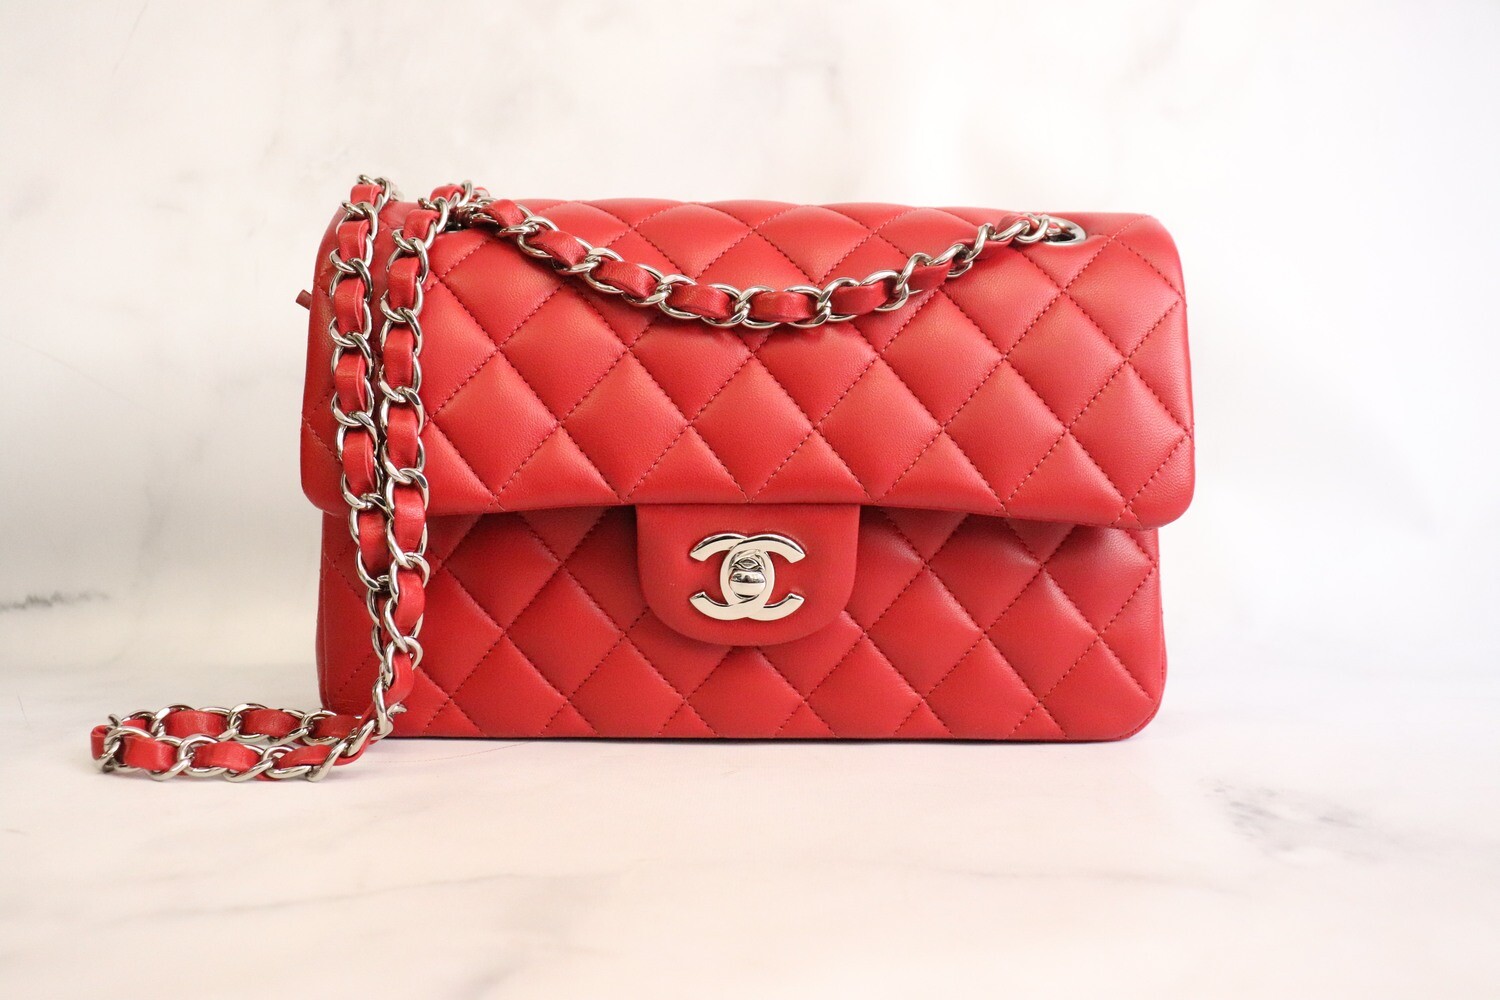 Chanel Classic Small Double Flap, Red Lambskin Leather, Silver Hardware,  Preowned in Dustbag - Julia Rose Boston | Shop